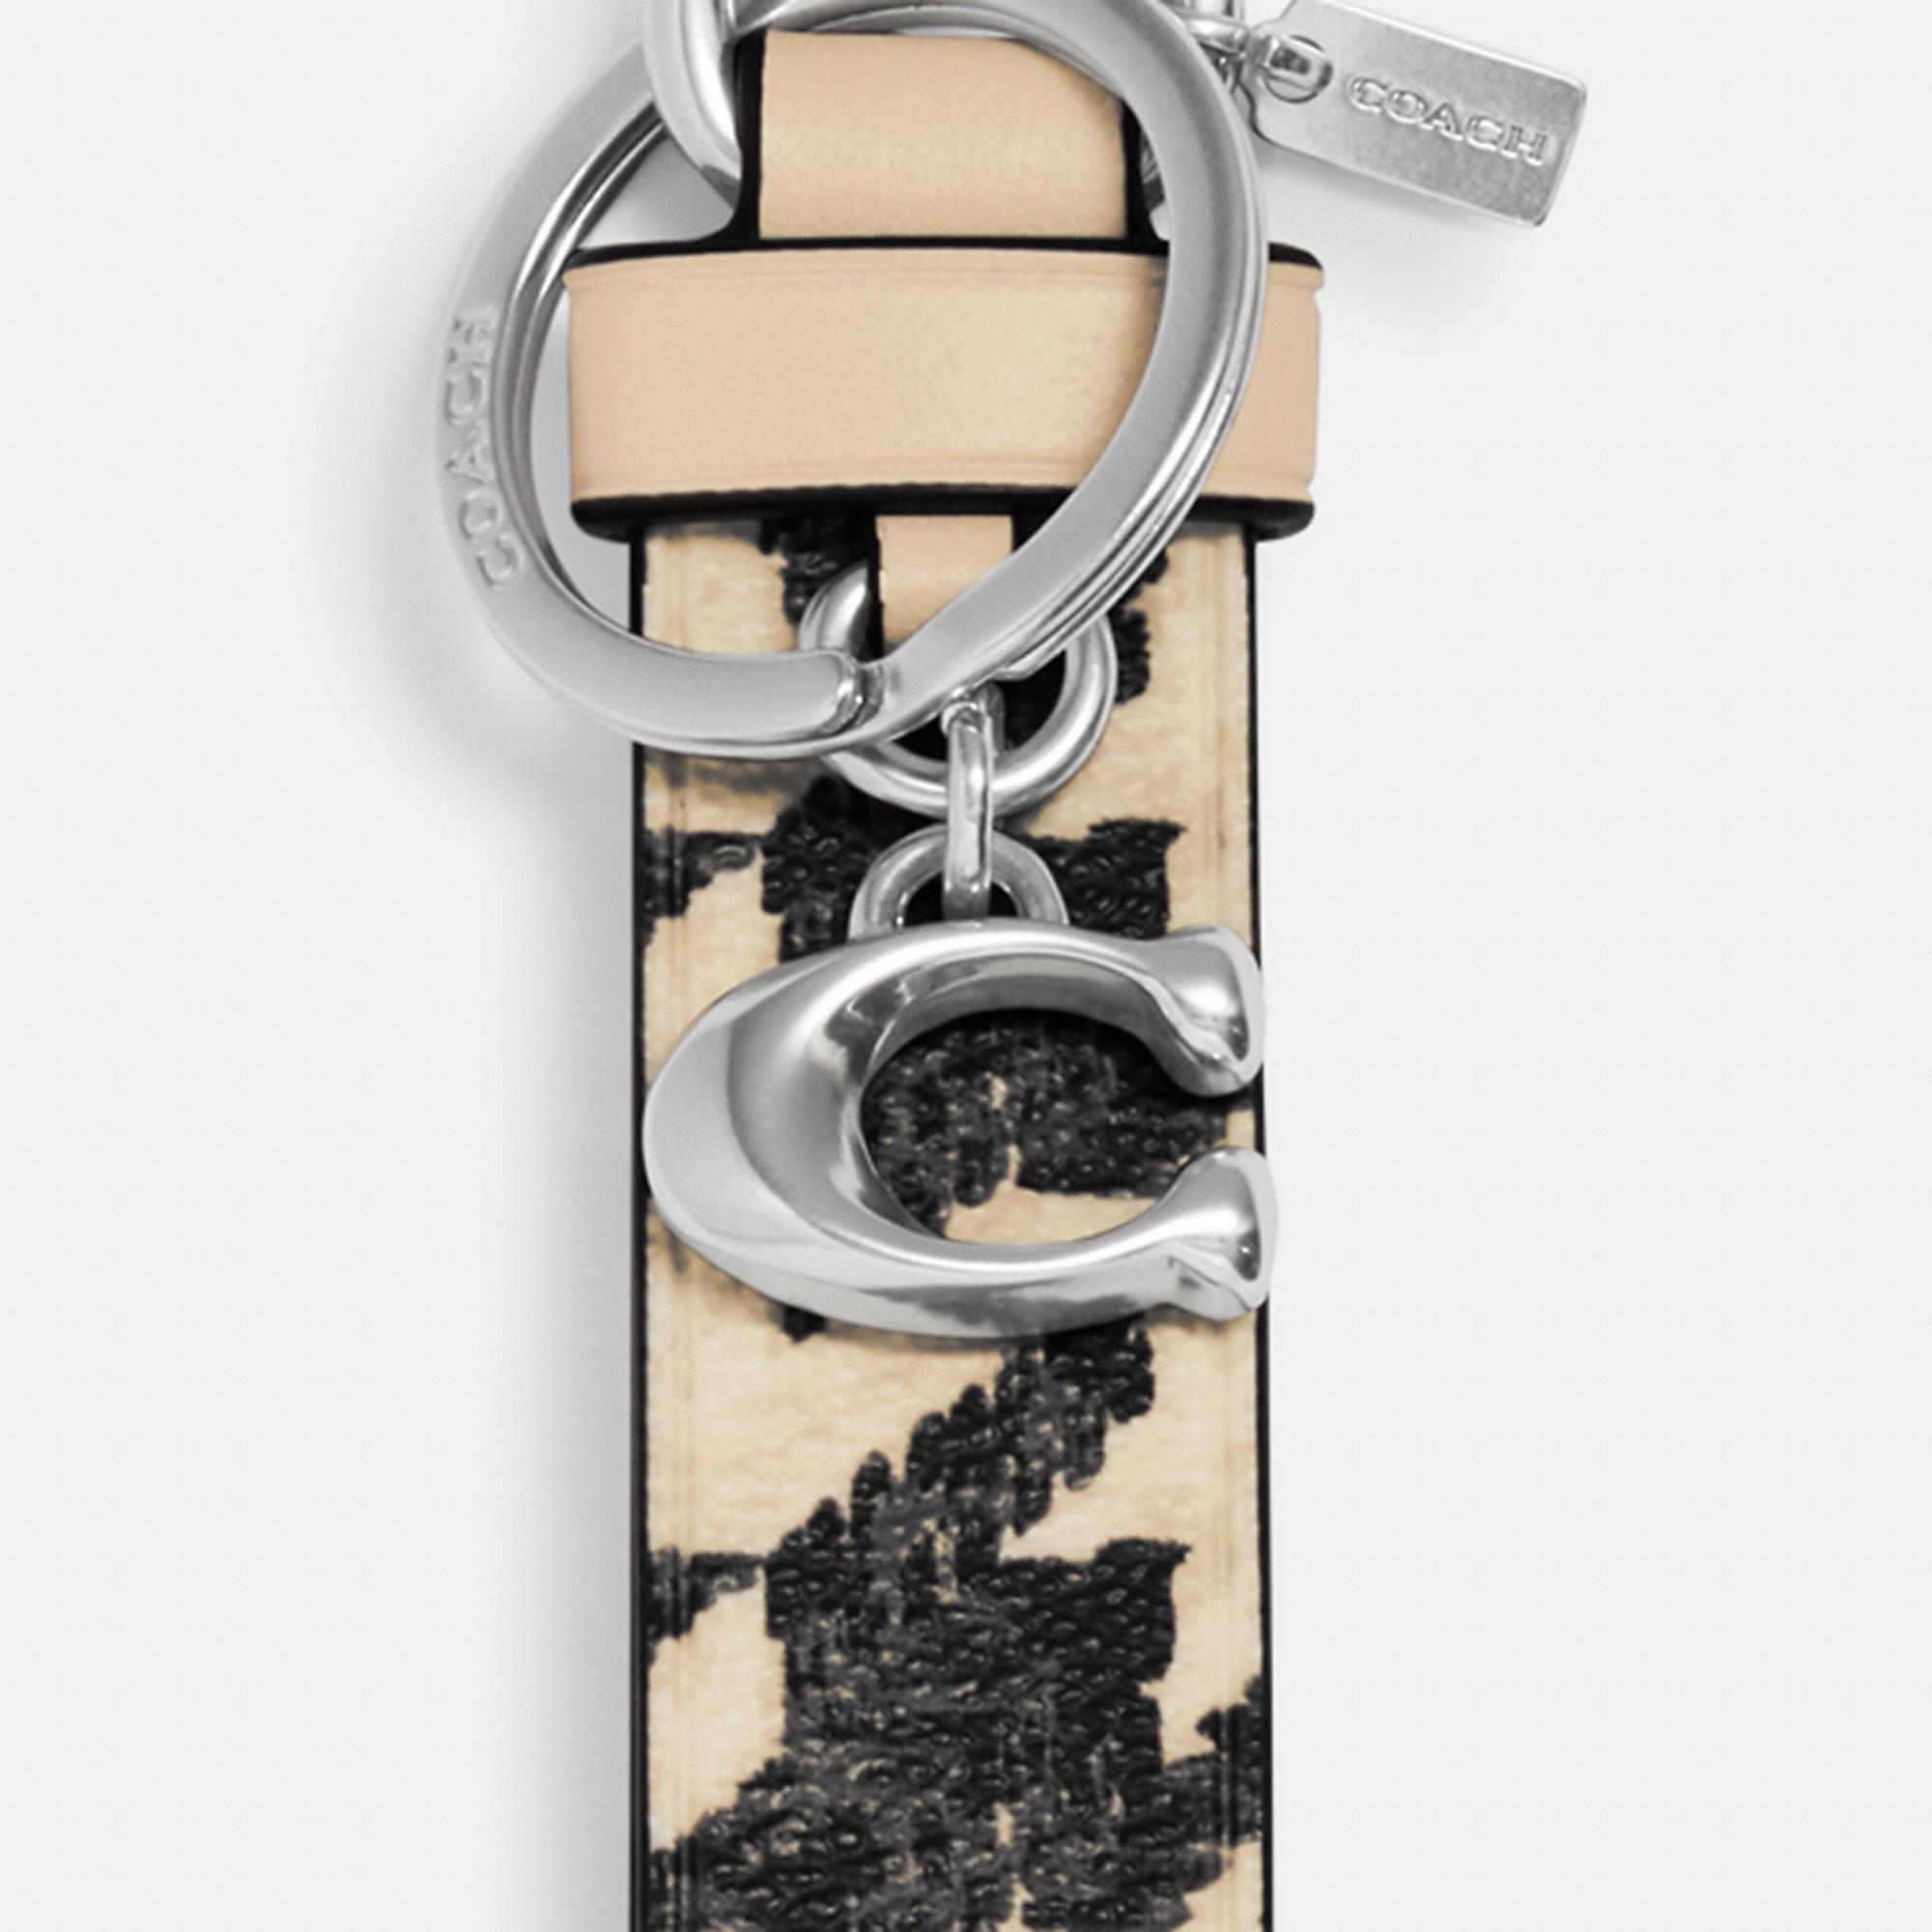 Coach Outlet Loop Bag Charm With Houndstooth Print in White